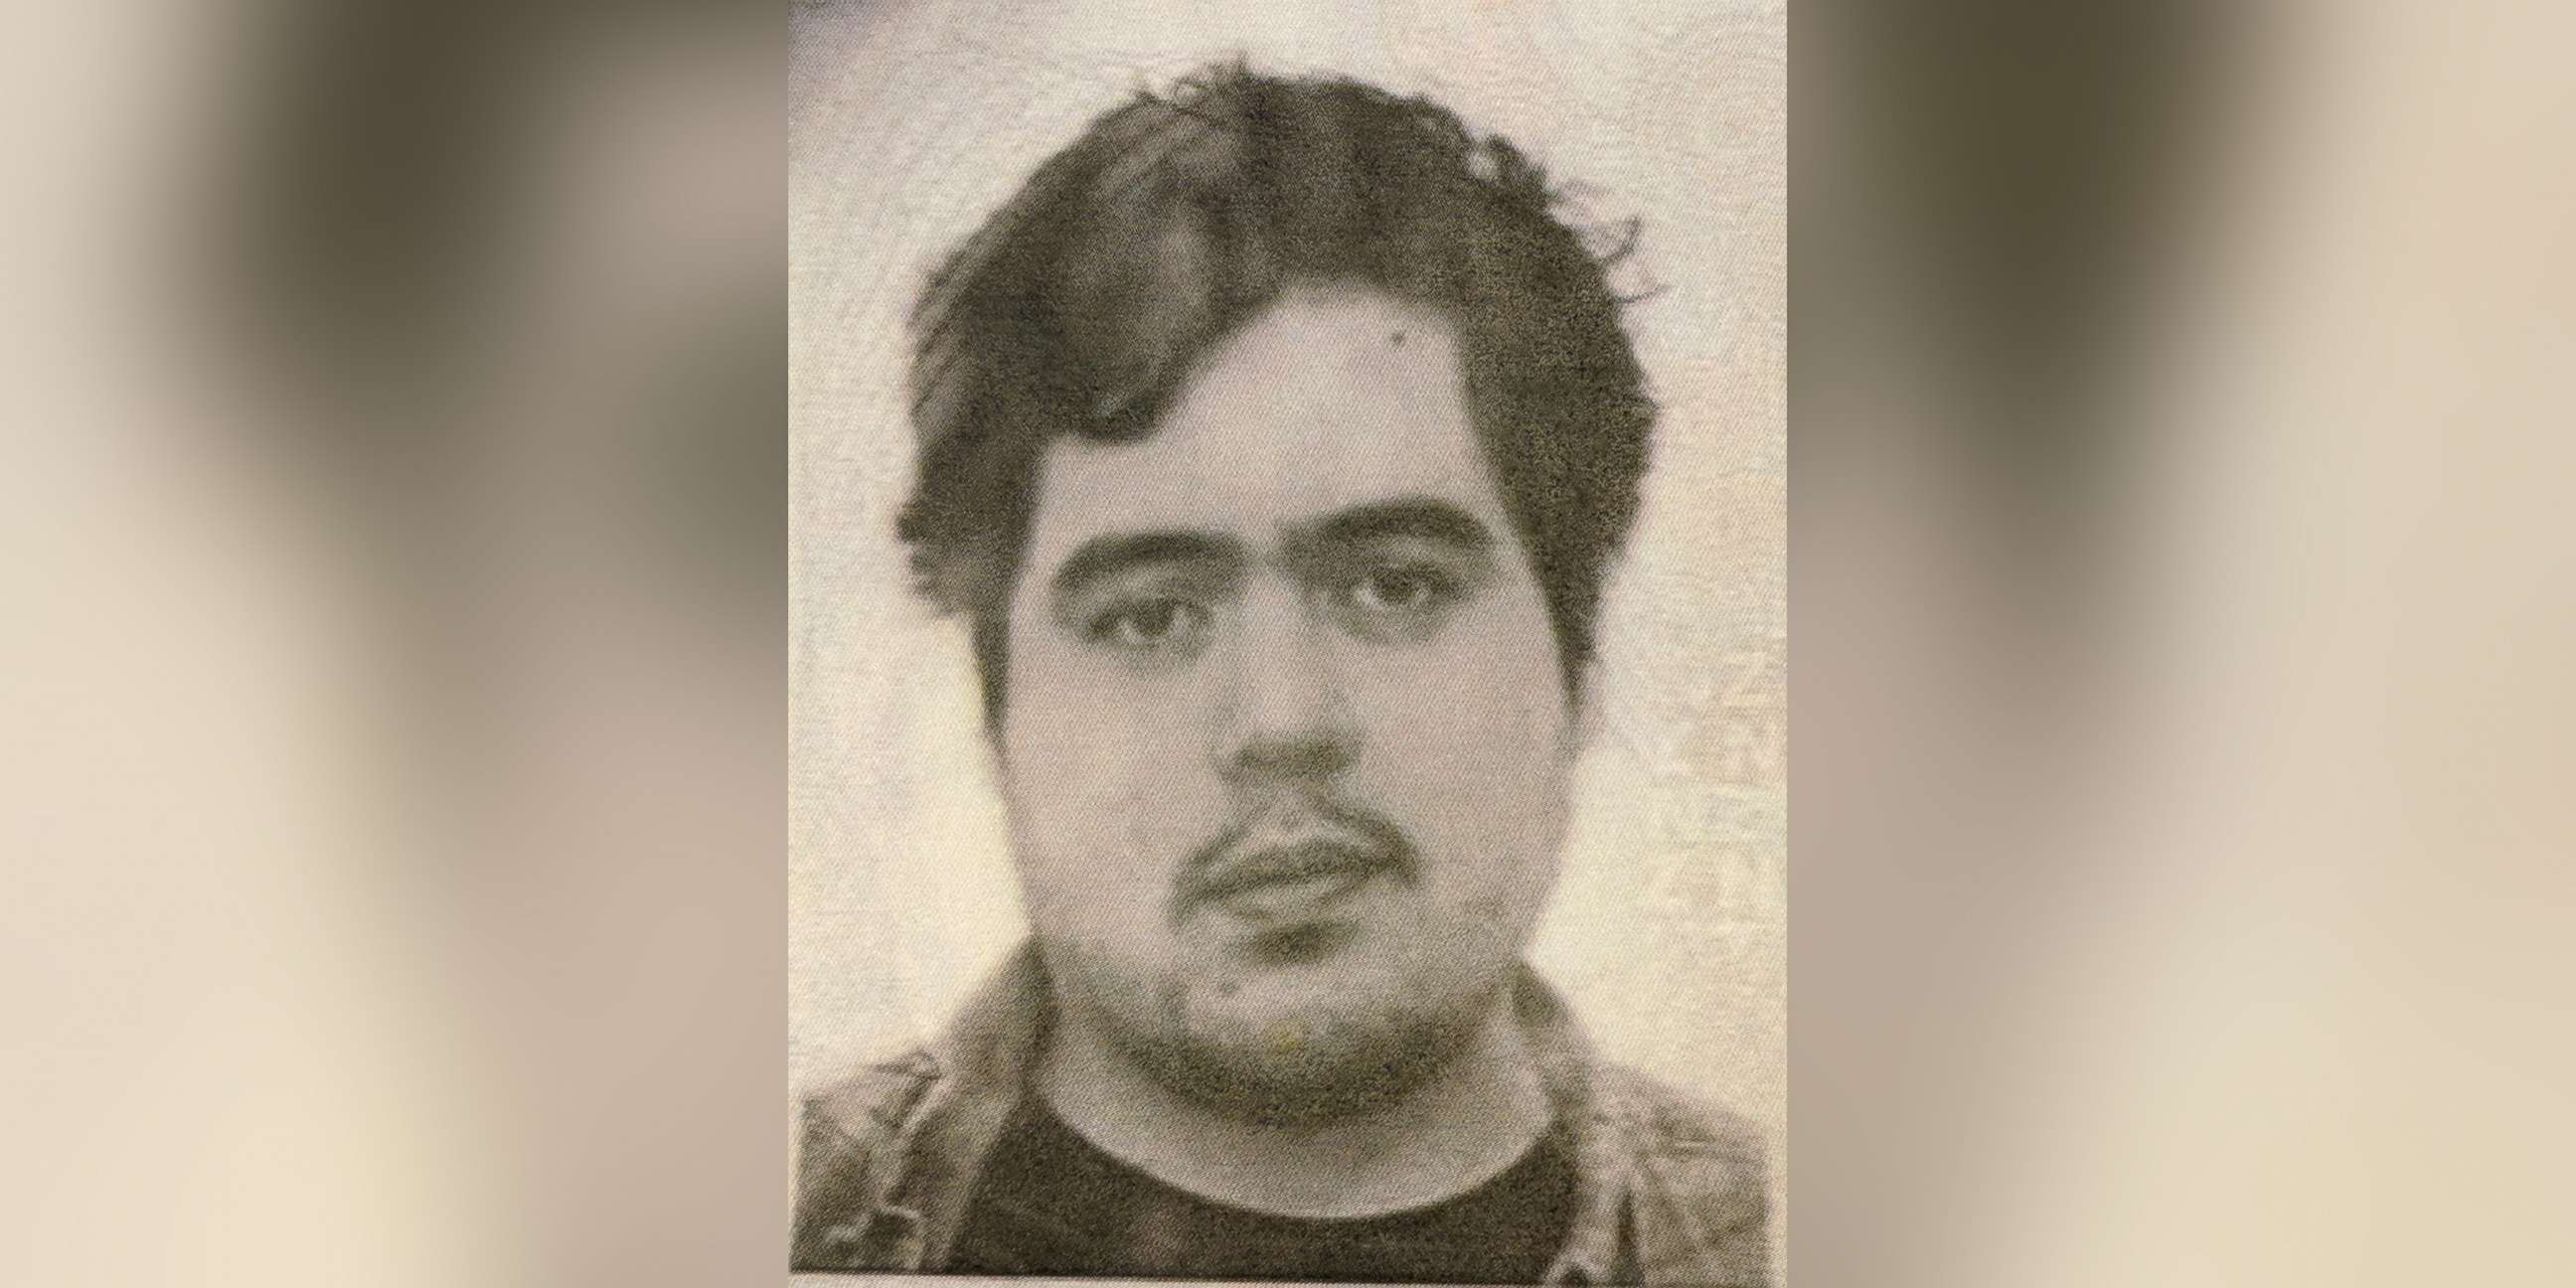 PHOTO: Troy George Skinner is pictured in a New Zealand passport photo dated March 21, 2018.